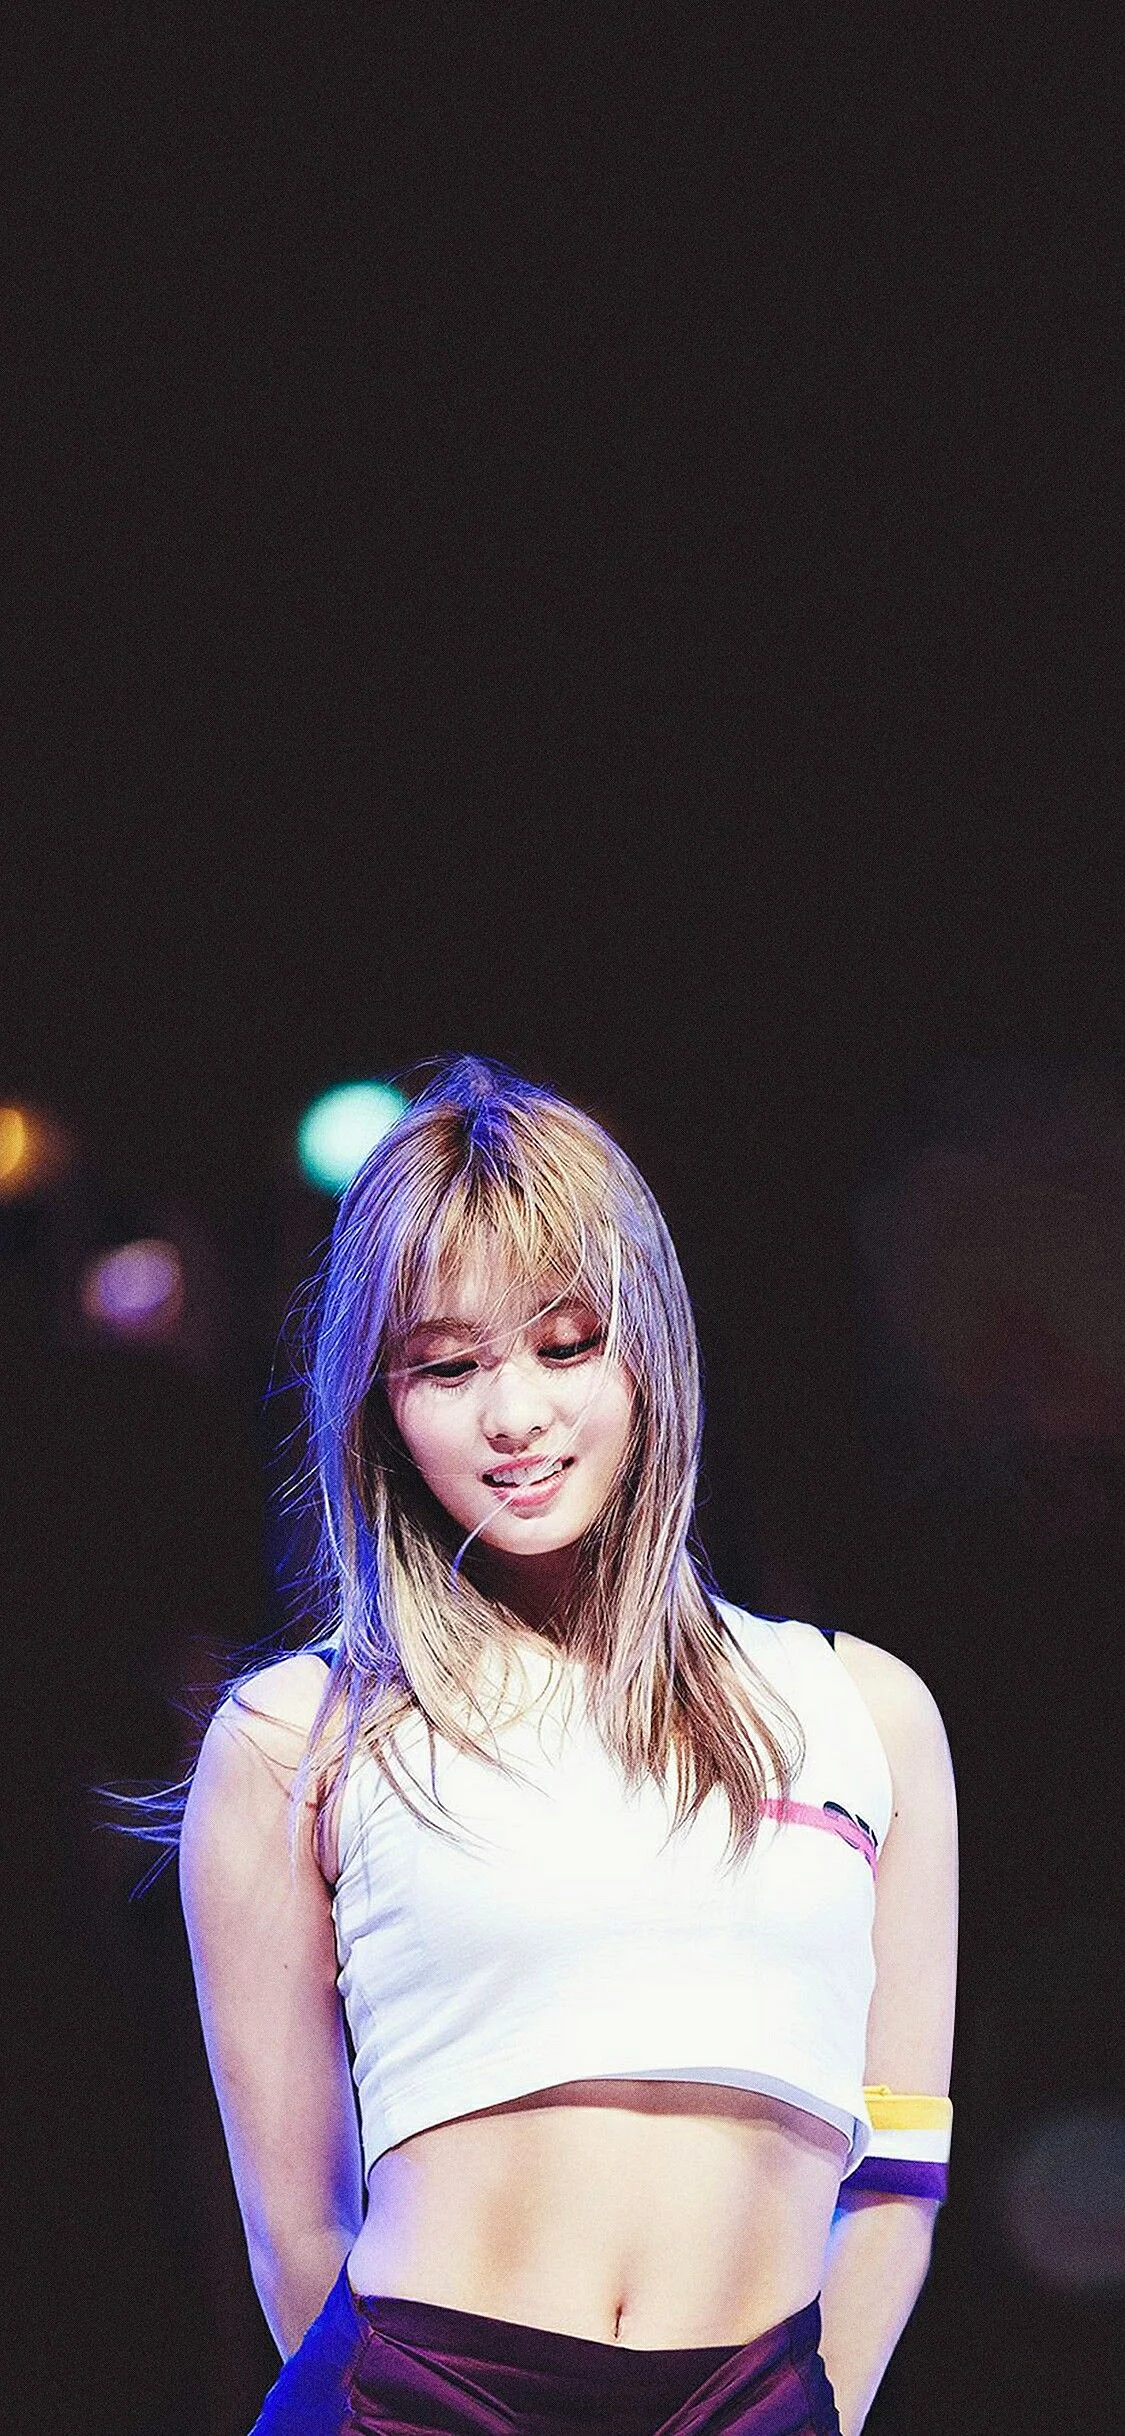 Twice Momo Wallpaper For iPhone